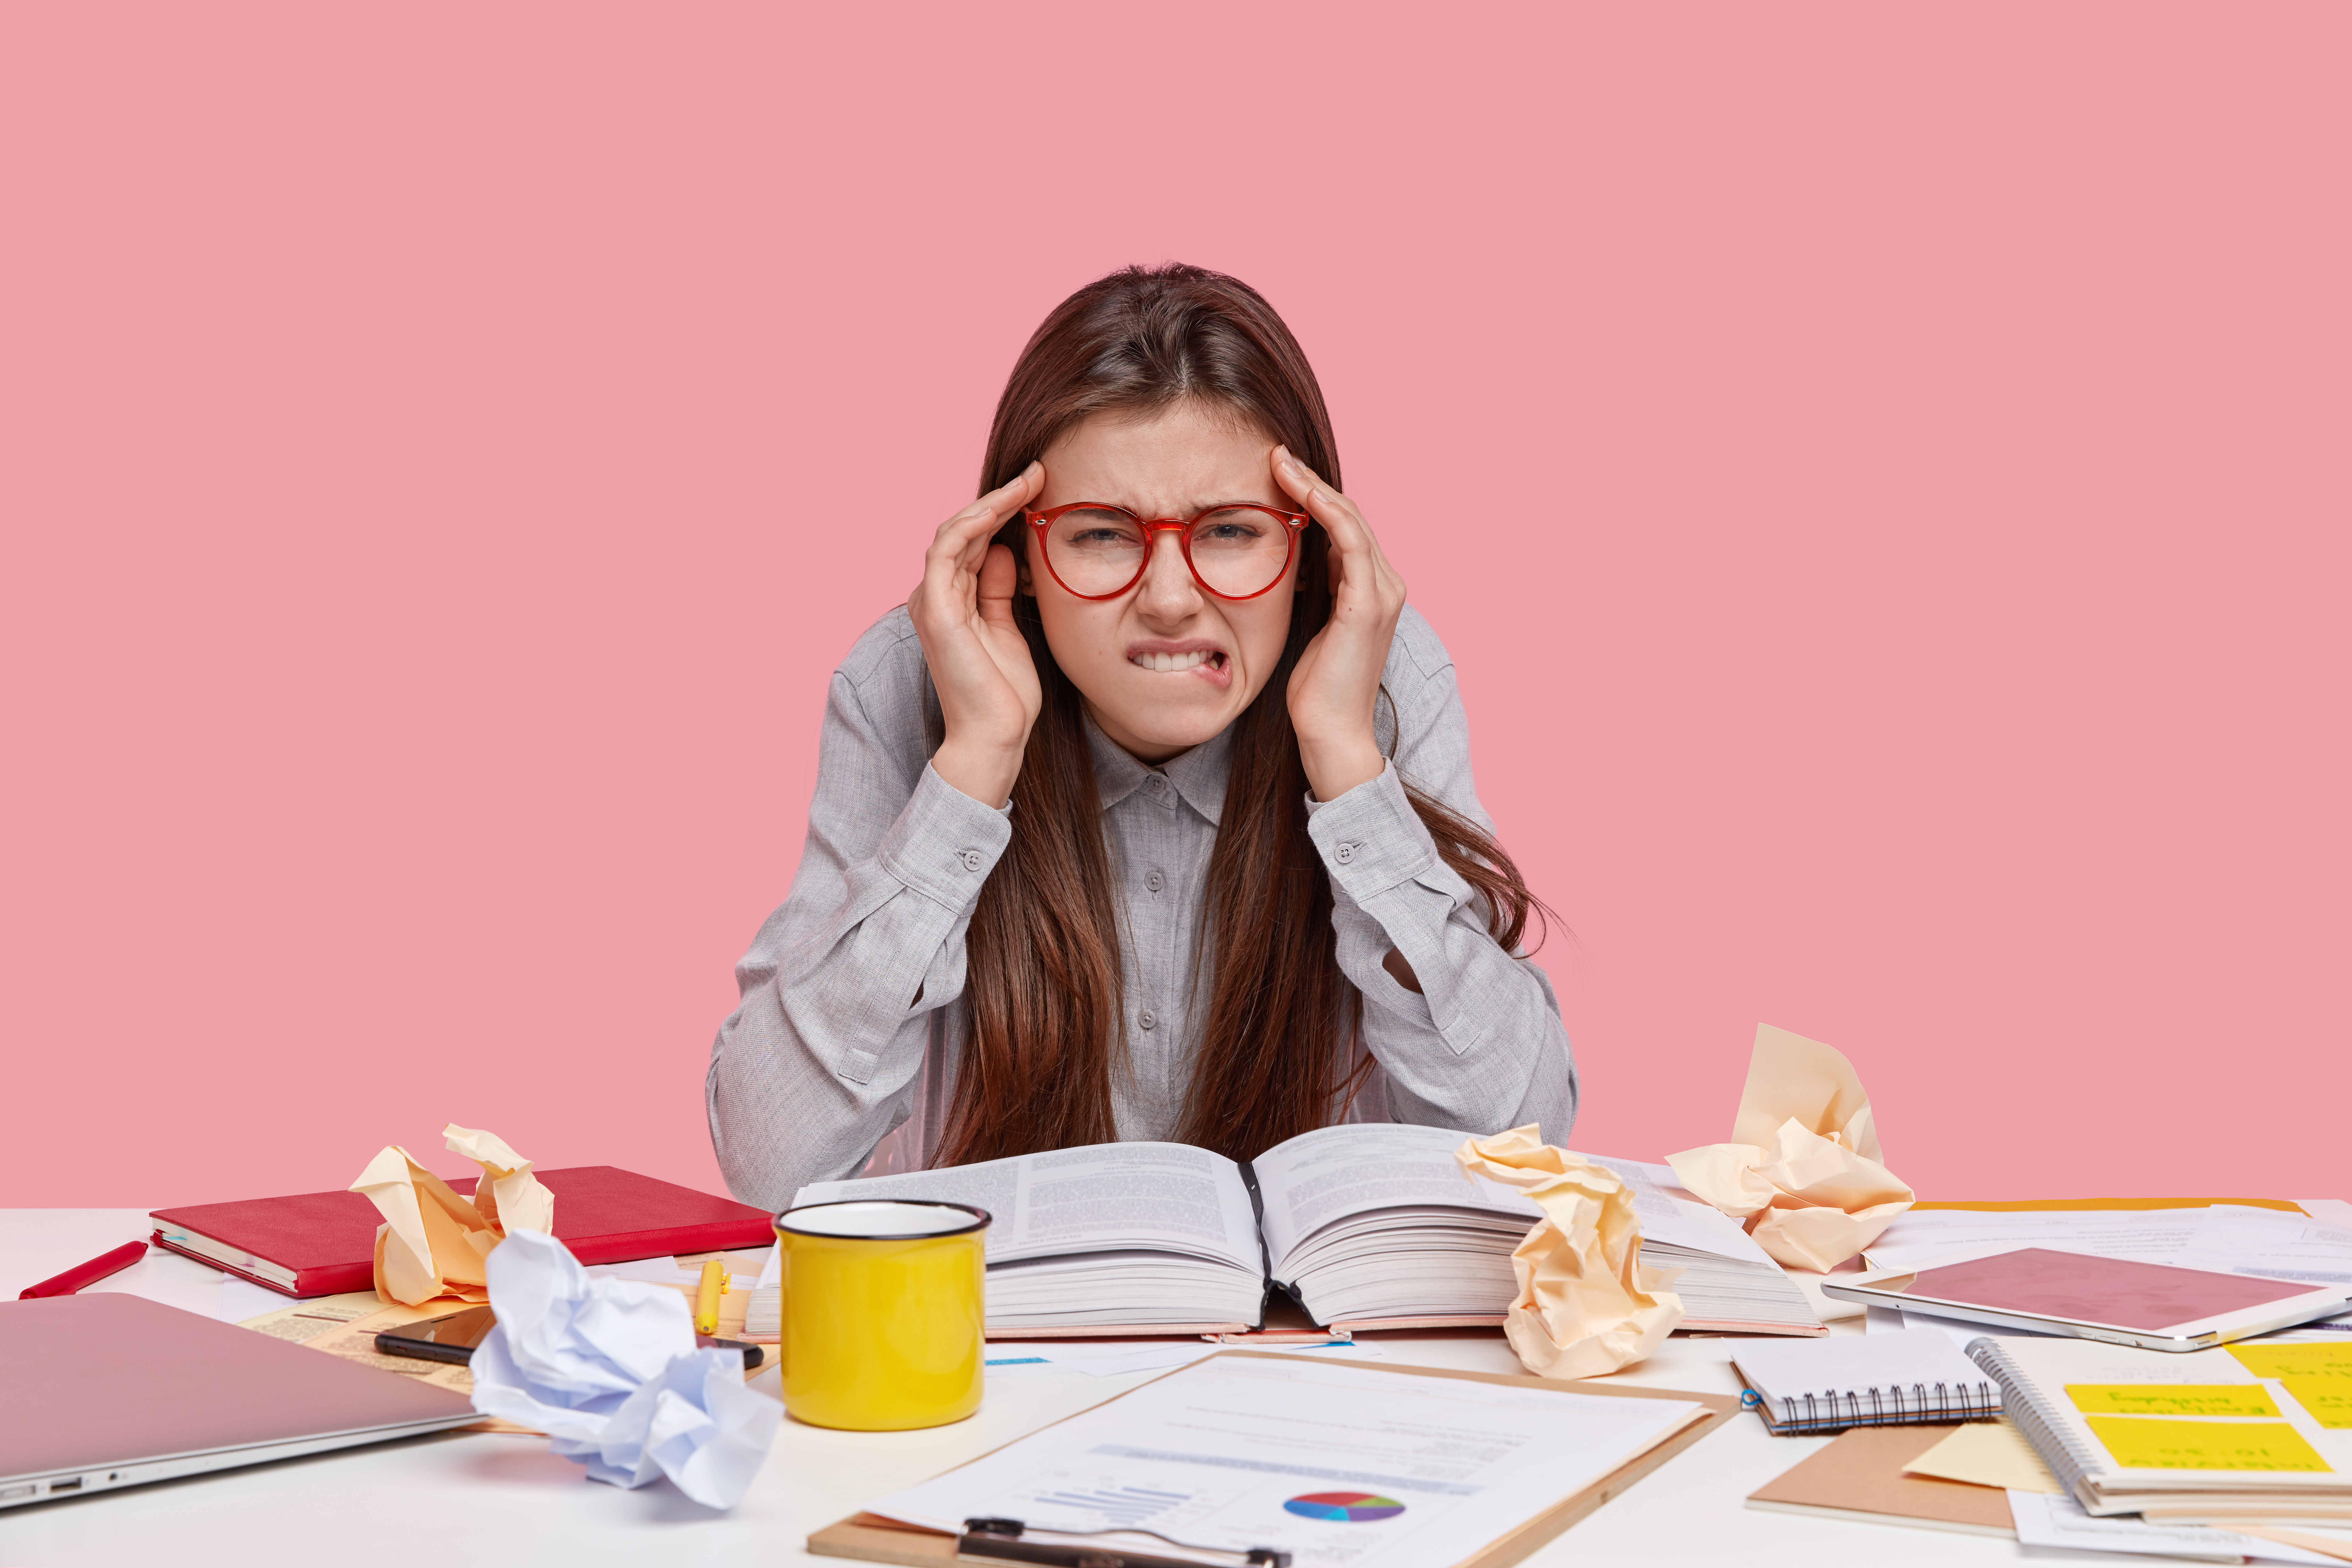 overworked-pretty-woman-bites-lower-lip-suffers-from-headache-reads-scientific-article-book-has-mess-table